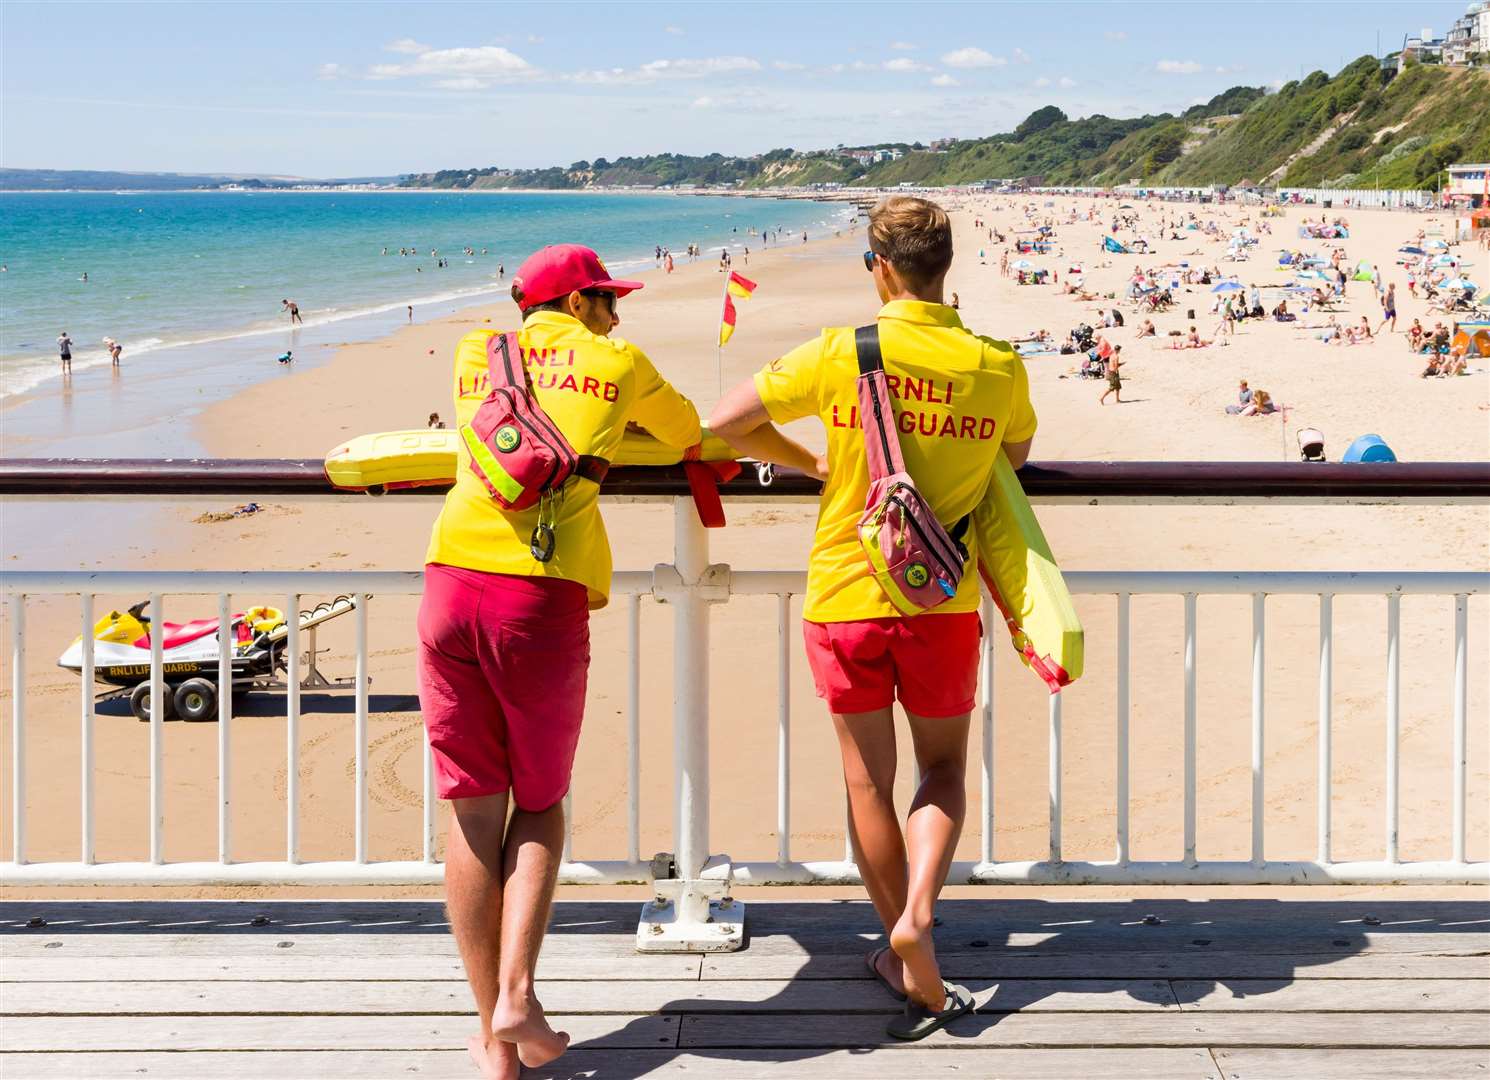 Two RNLI lifeguards in uniform watch over Bournemouth beach – the charity’s lifeguarding service launched in 2001. Image: iStock.